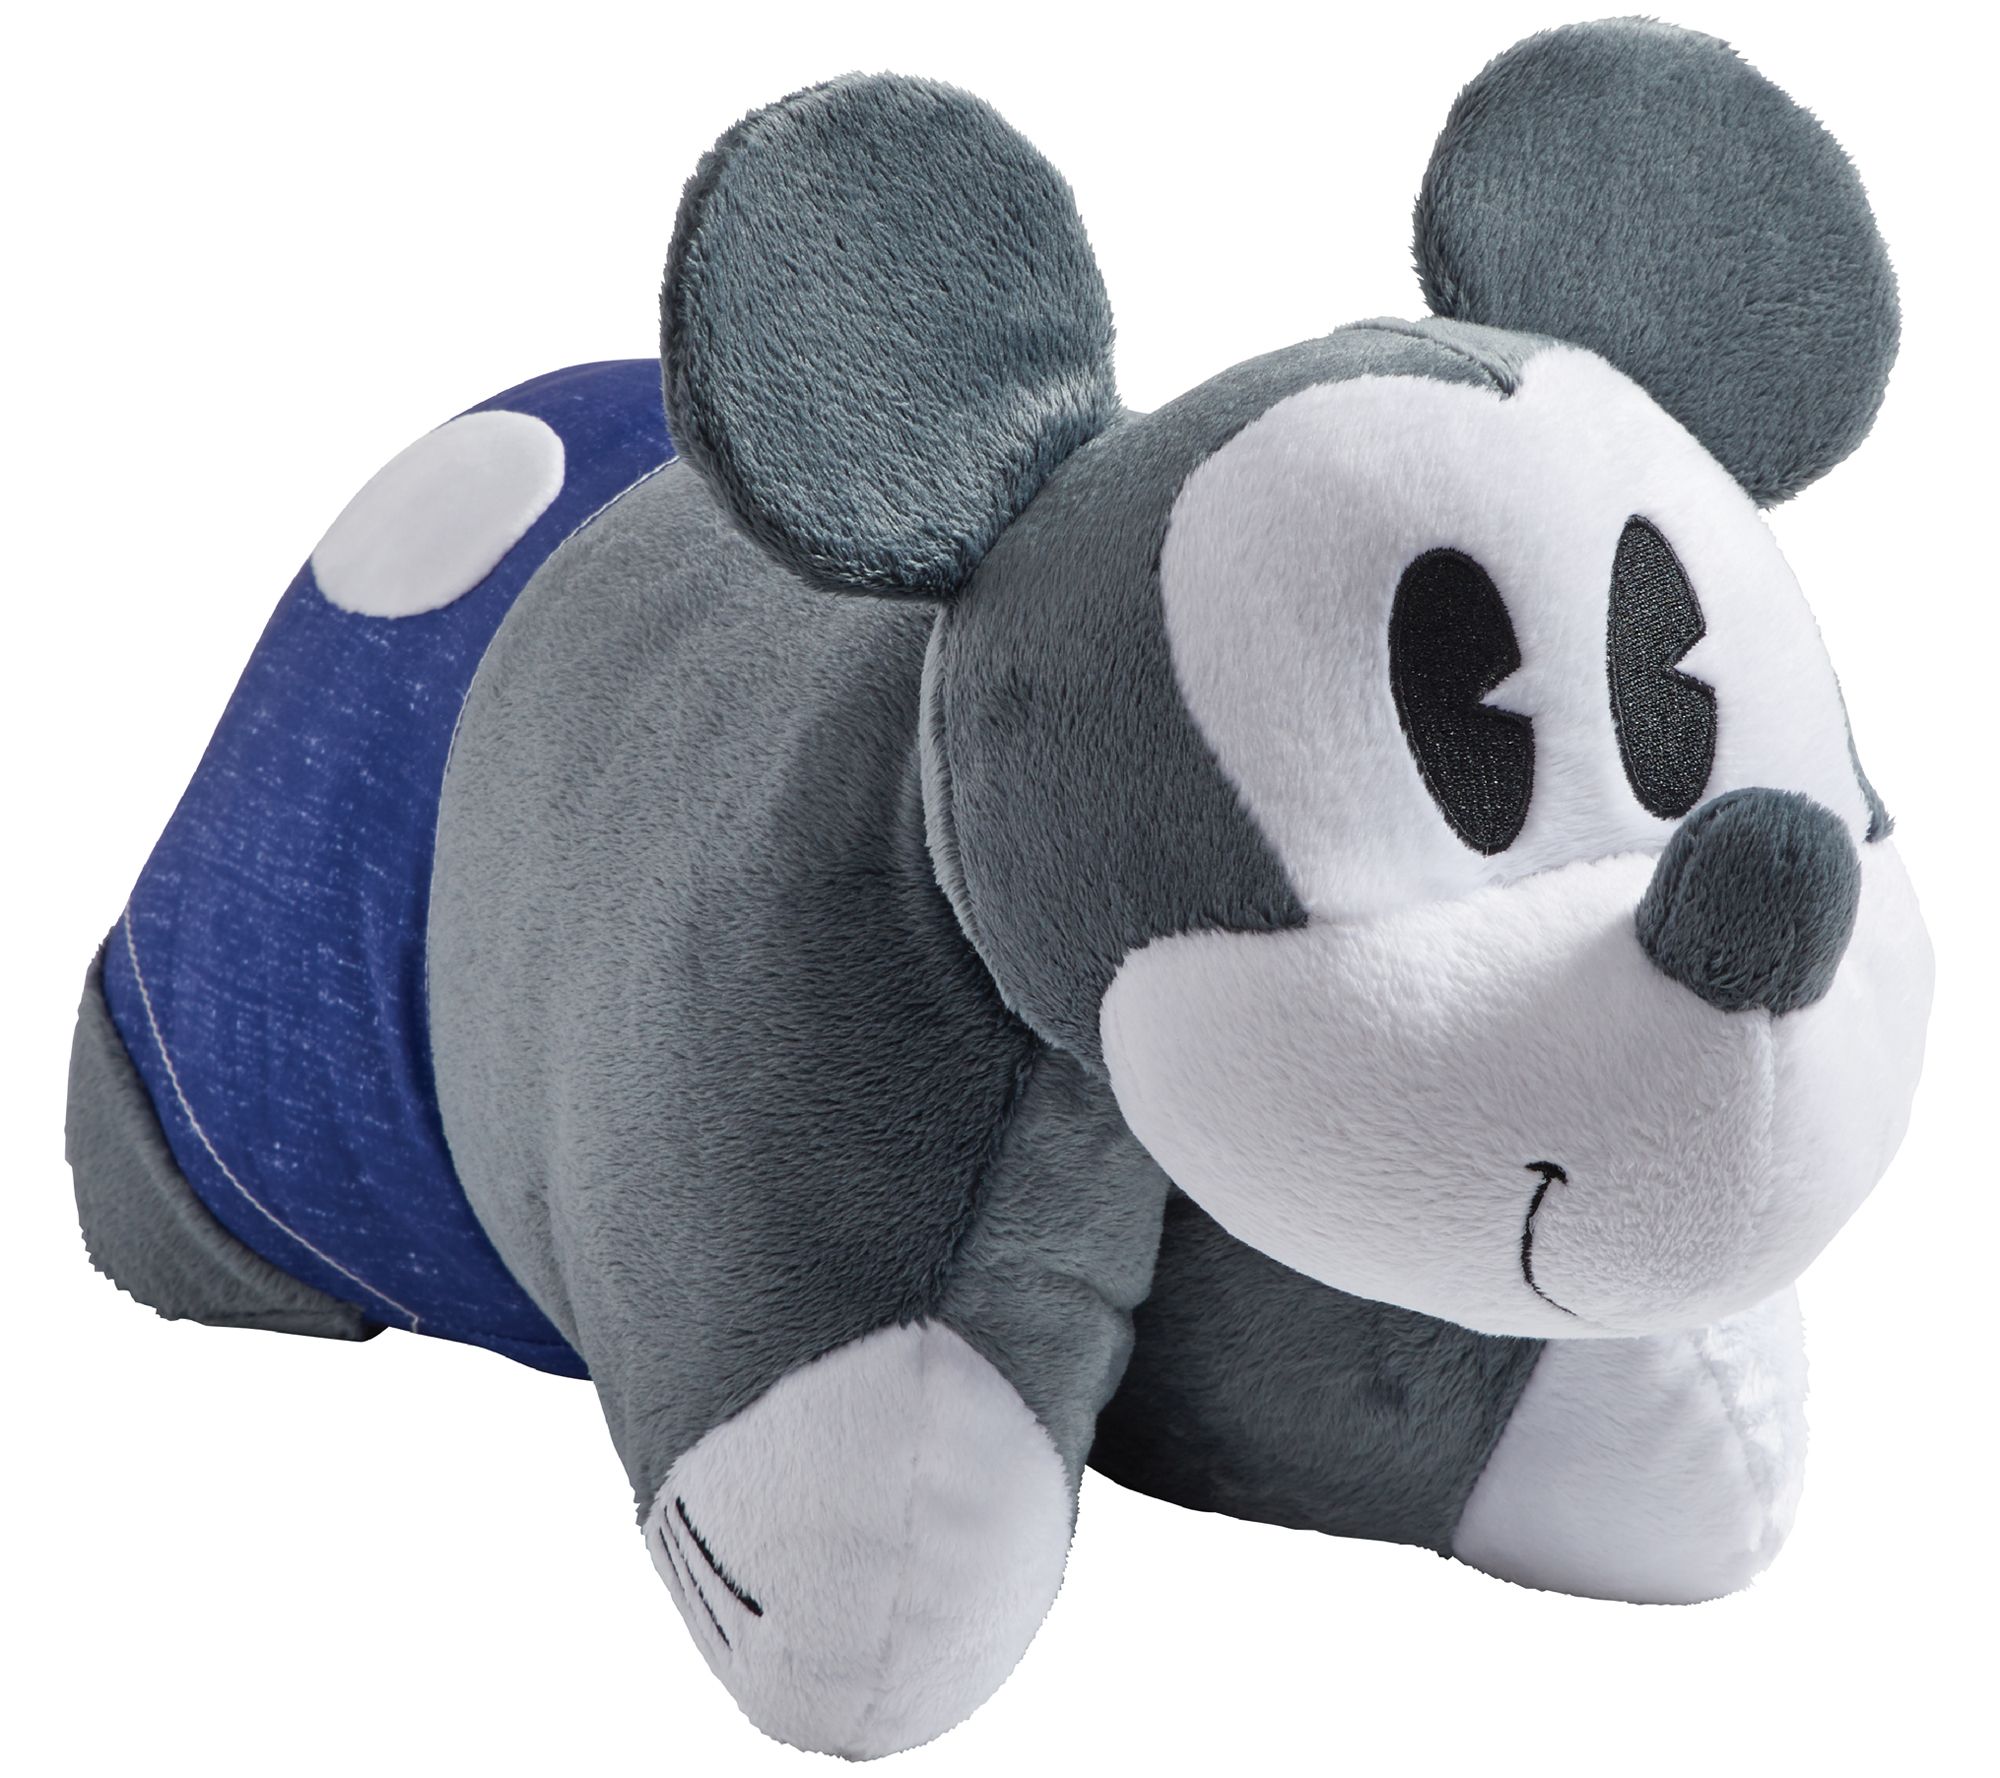 mickey mouse pillow pet